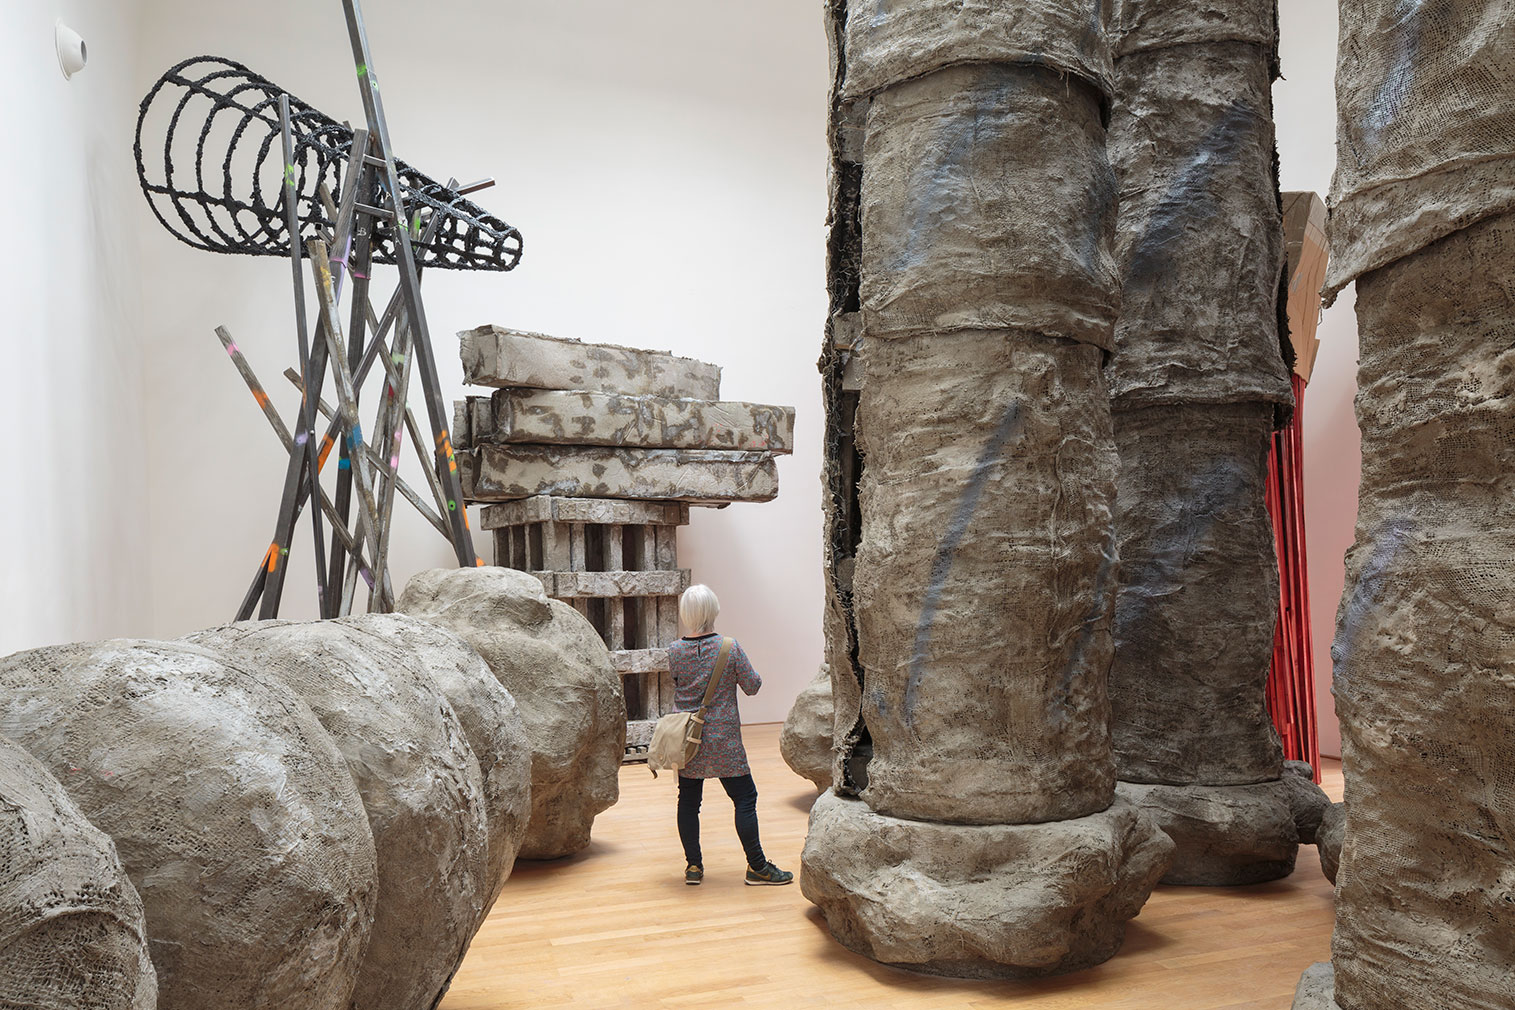 Phyllida Barlow's Folly installation in British Pavilion at the Venice Biennale